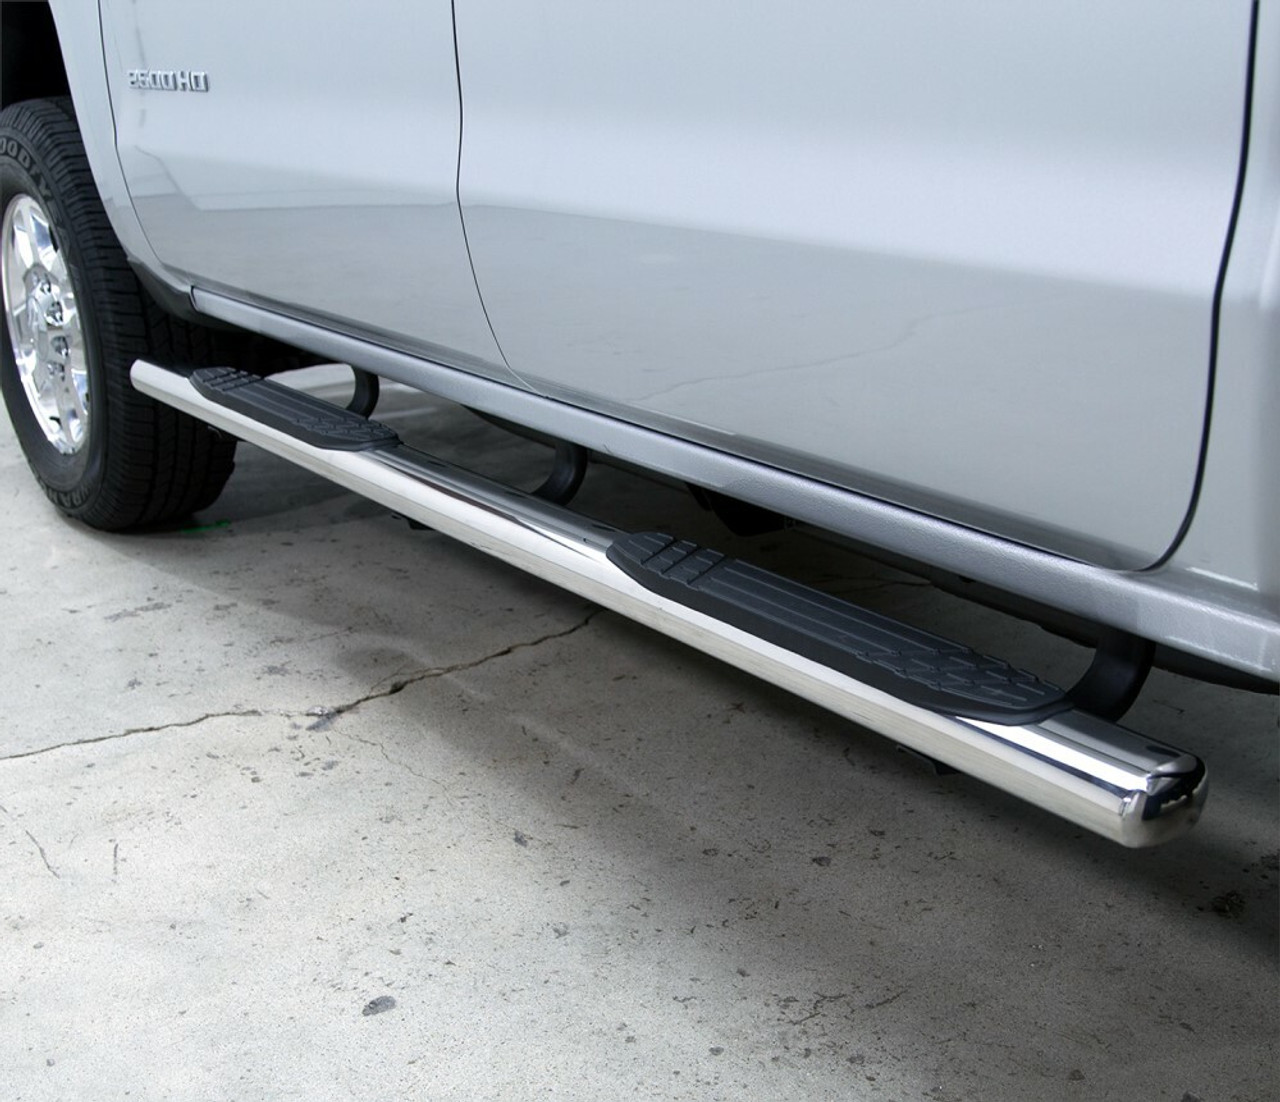 Go Rhino 684403580T Chevrolet, Colorado, 2015 - 2021, 4 inch OE Xtreme - Complete Kit: Sidesteps + Brackets, Galvanized Steel, Textured black, 640080T bars + 6840355 OE Xtreme Brackets. 4 inch wide x 80 inch long side bars